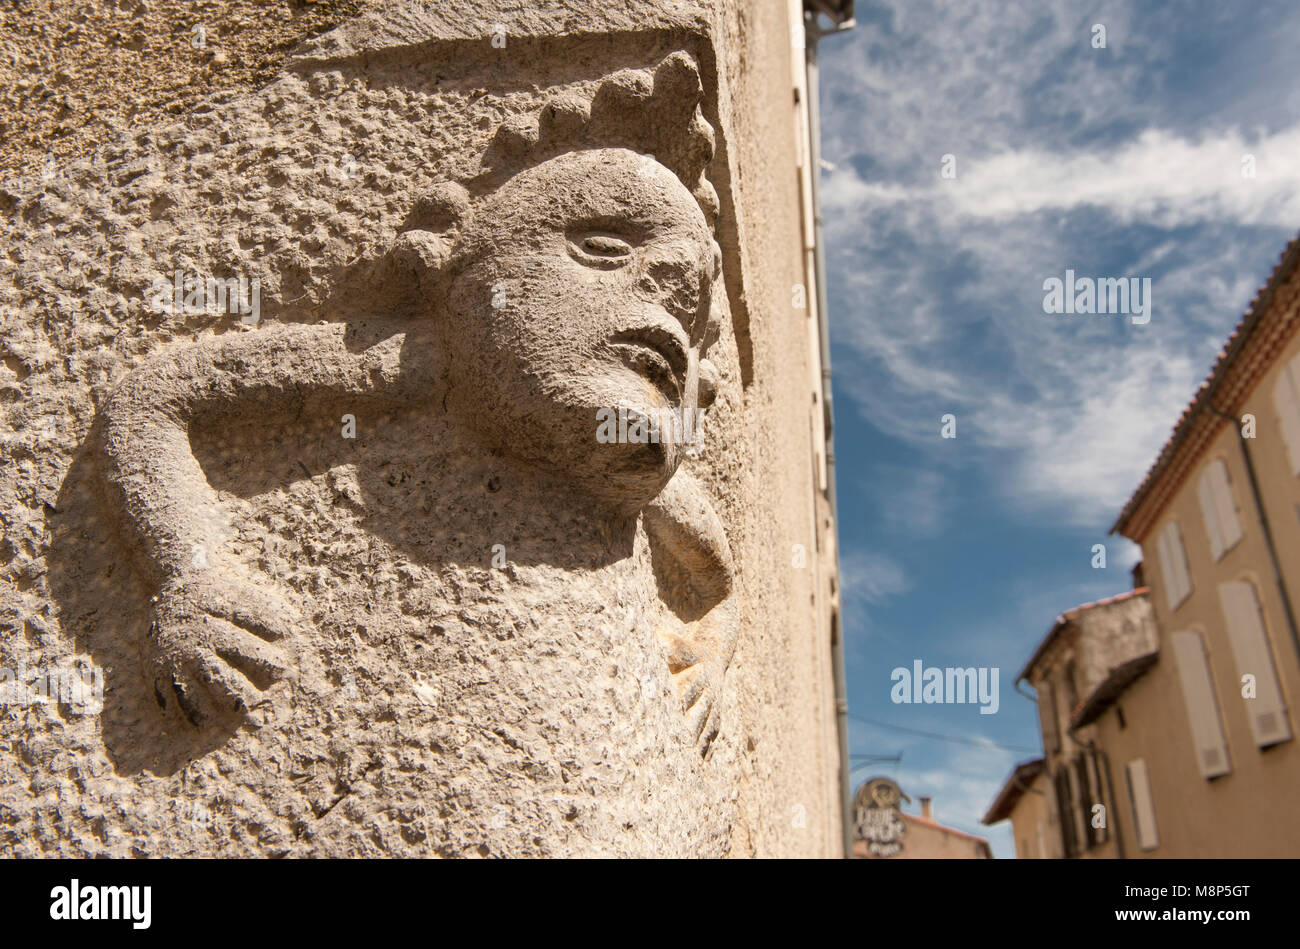 Stone masonry in Saint-Lizier, Occitanie, France: a face sculpted in stone on the corner of two historic homes in the old centre. Stock Photo